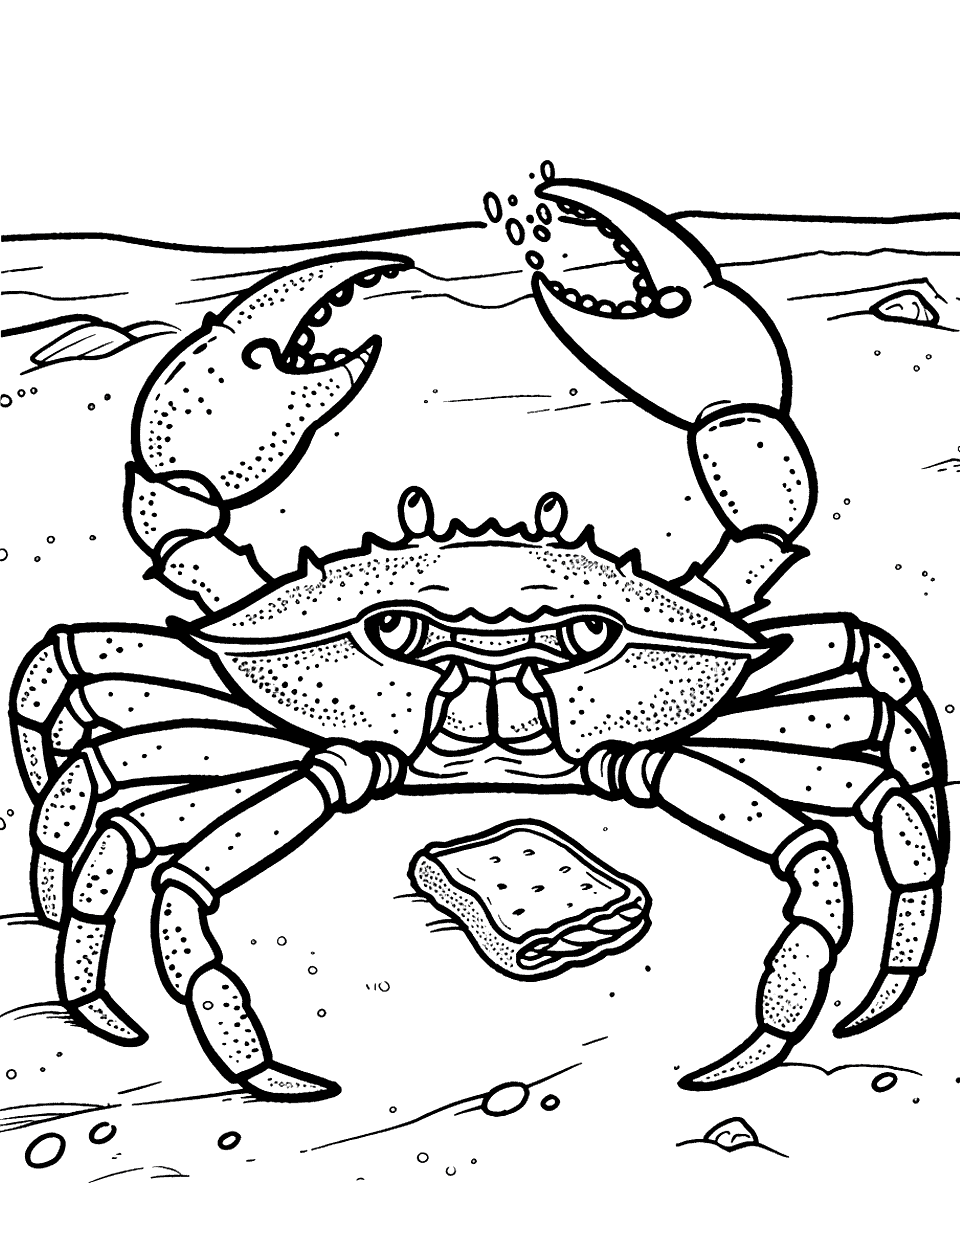 Crab Feast Coloring Page - A scene of a crab ready to munch on a tiny piece of leftover sandwich on the beach.